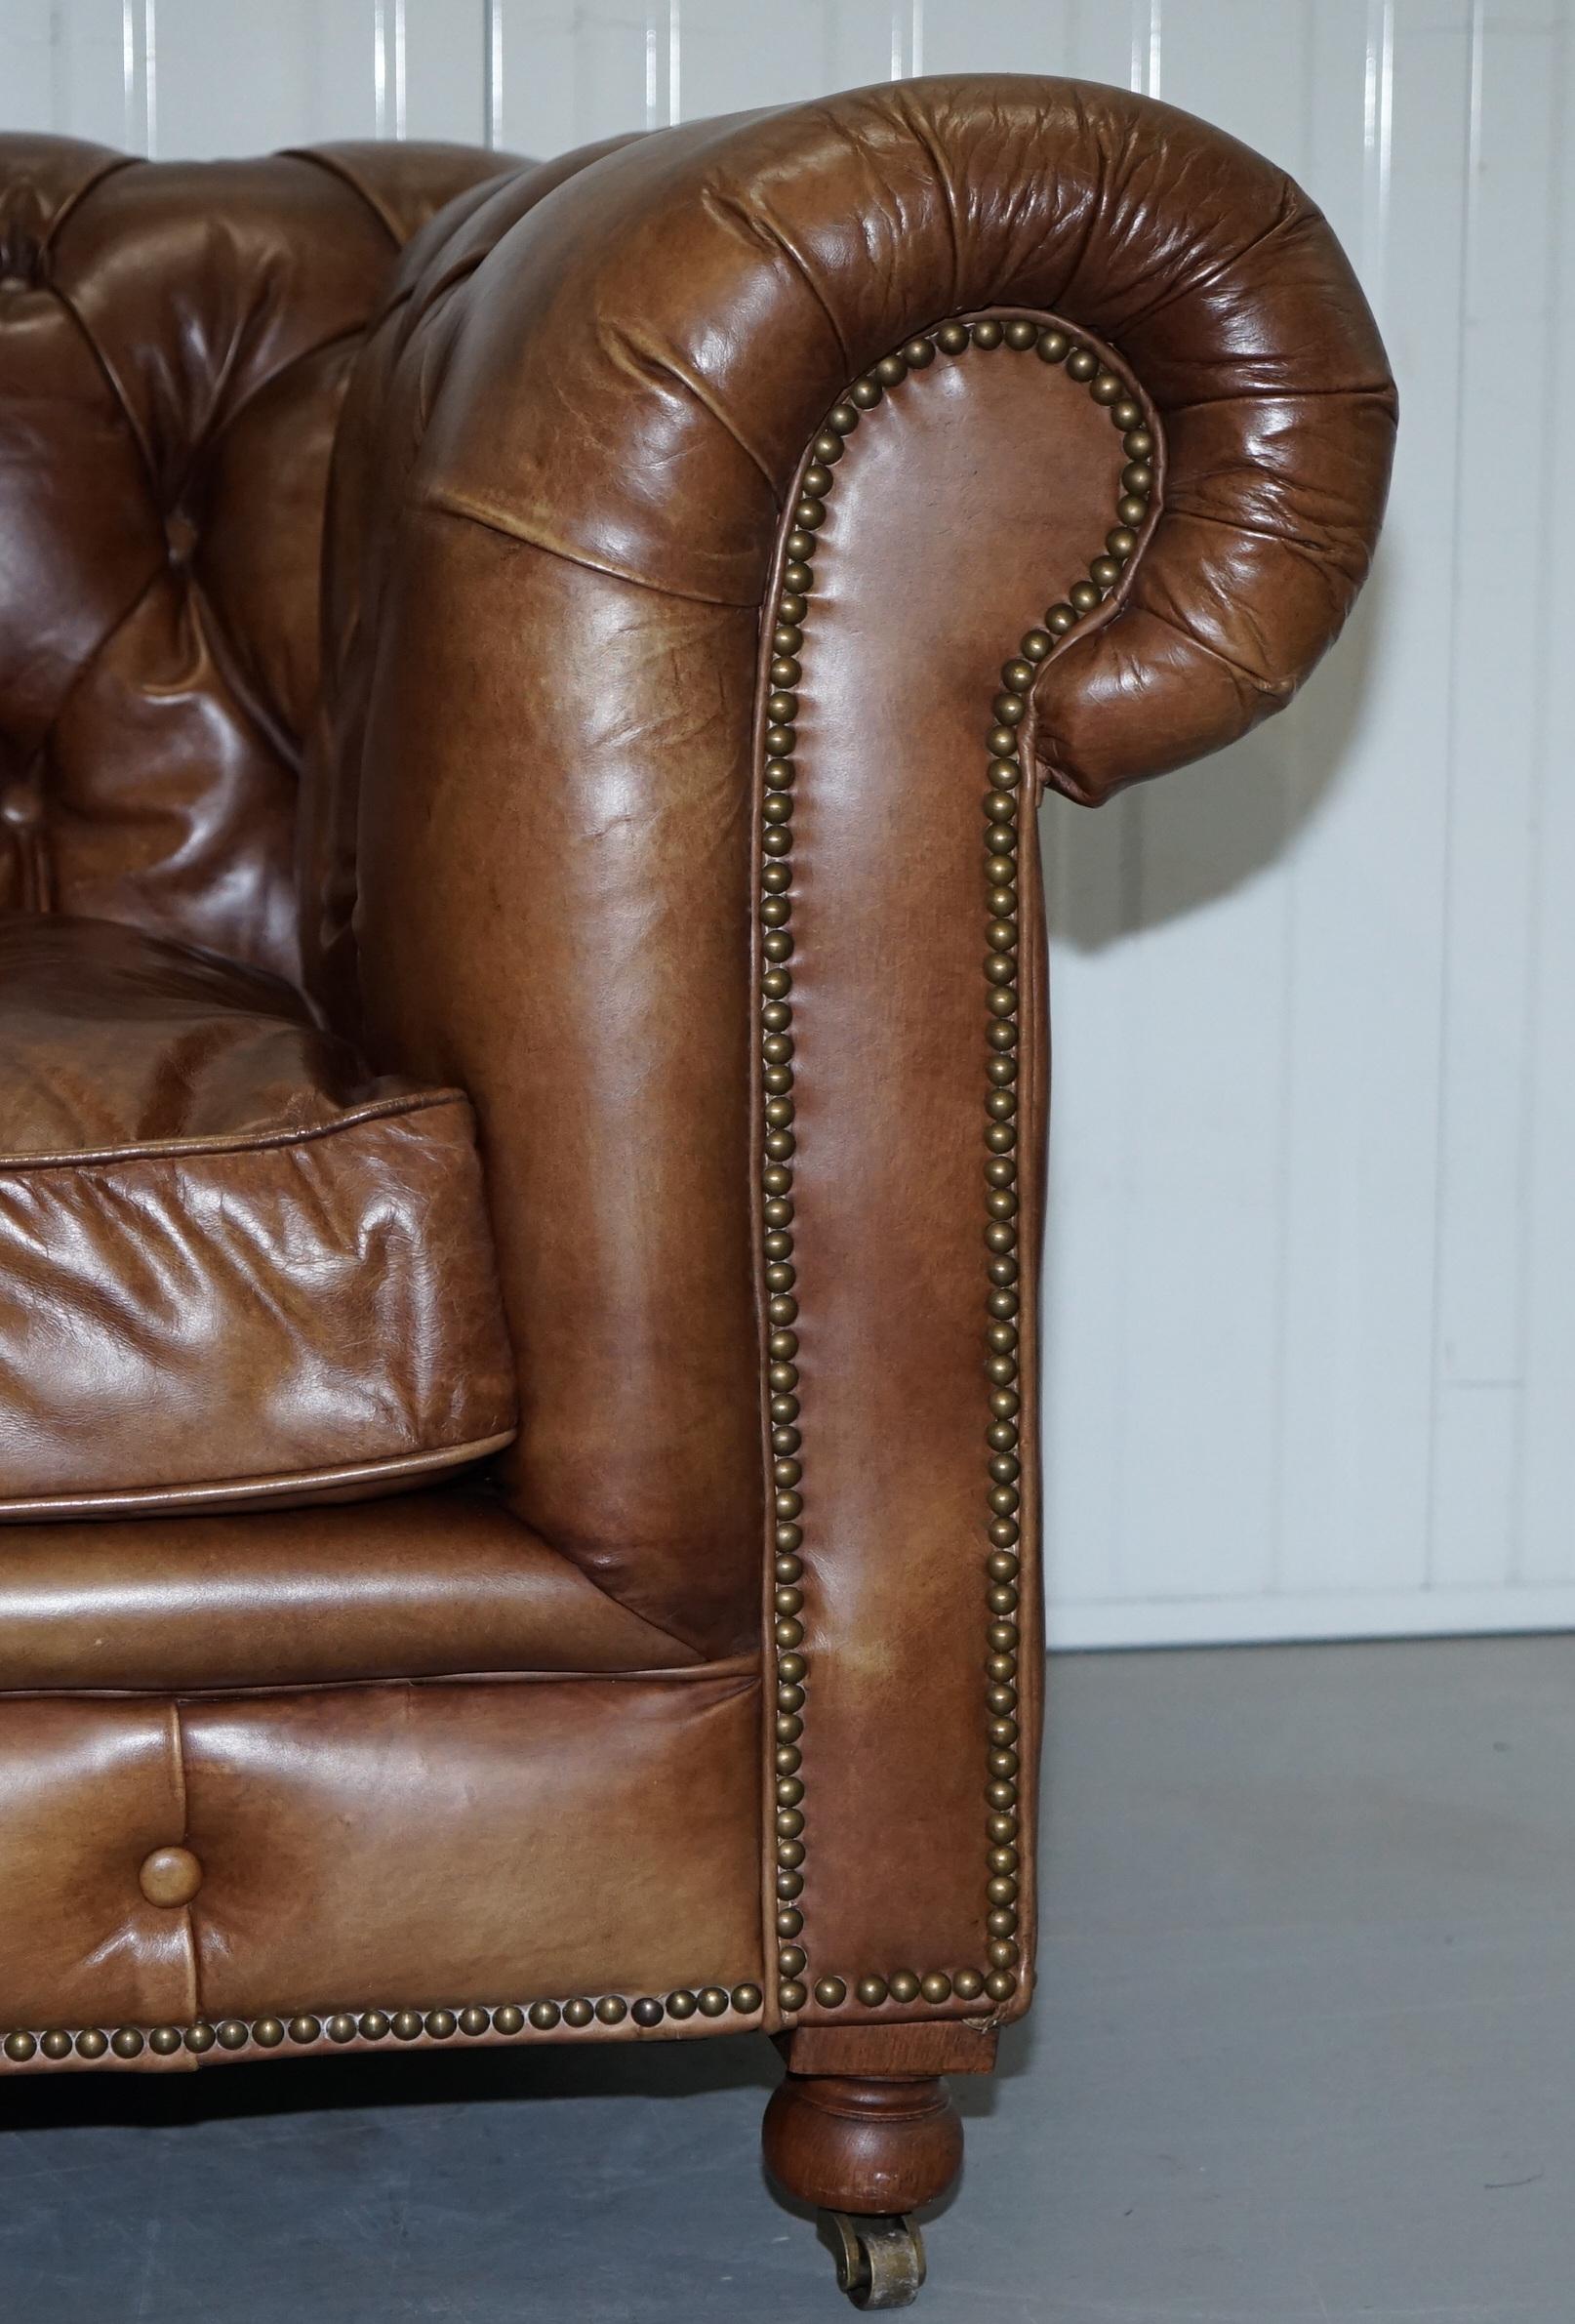 1 of 2 Timothy Oulton Halo Westminster Brown Leather Chesterfield Sofas 5